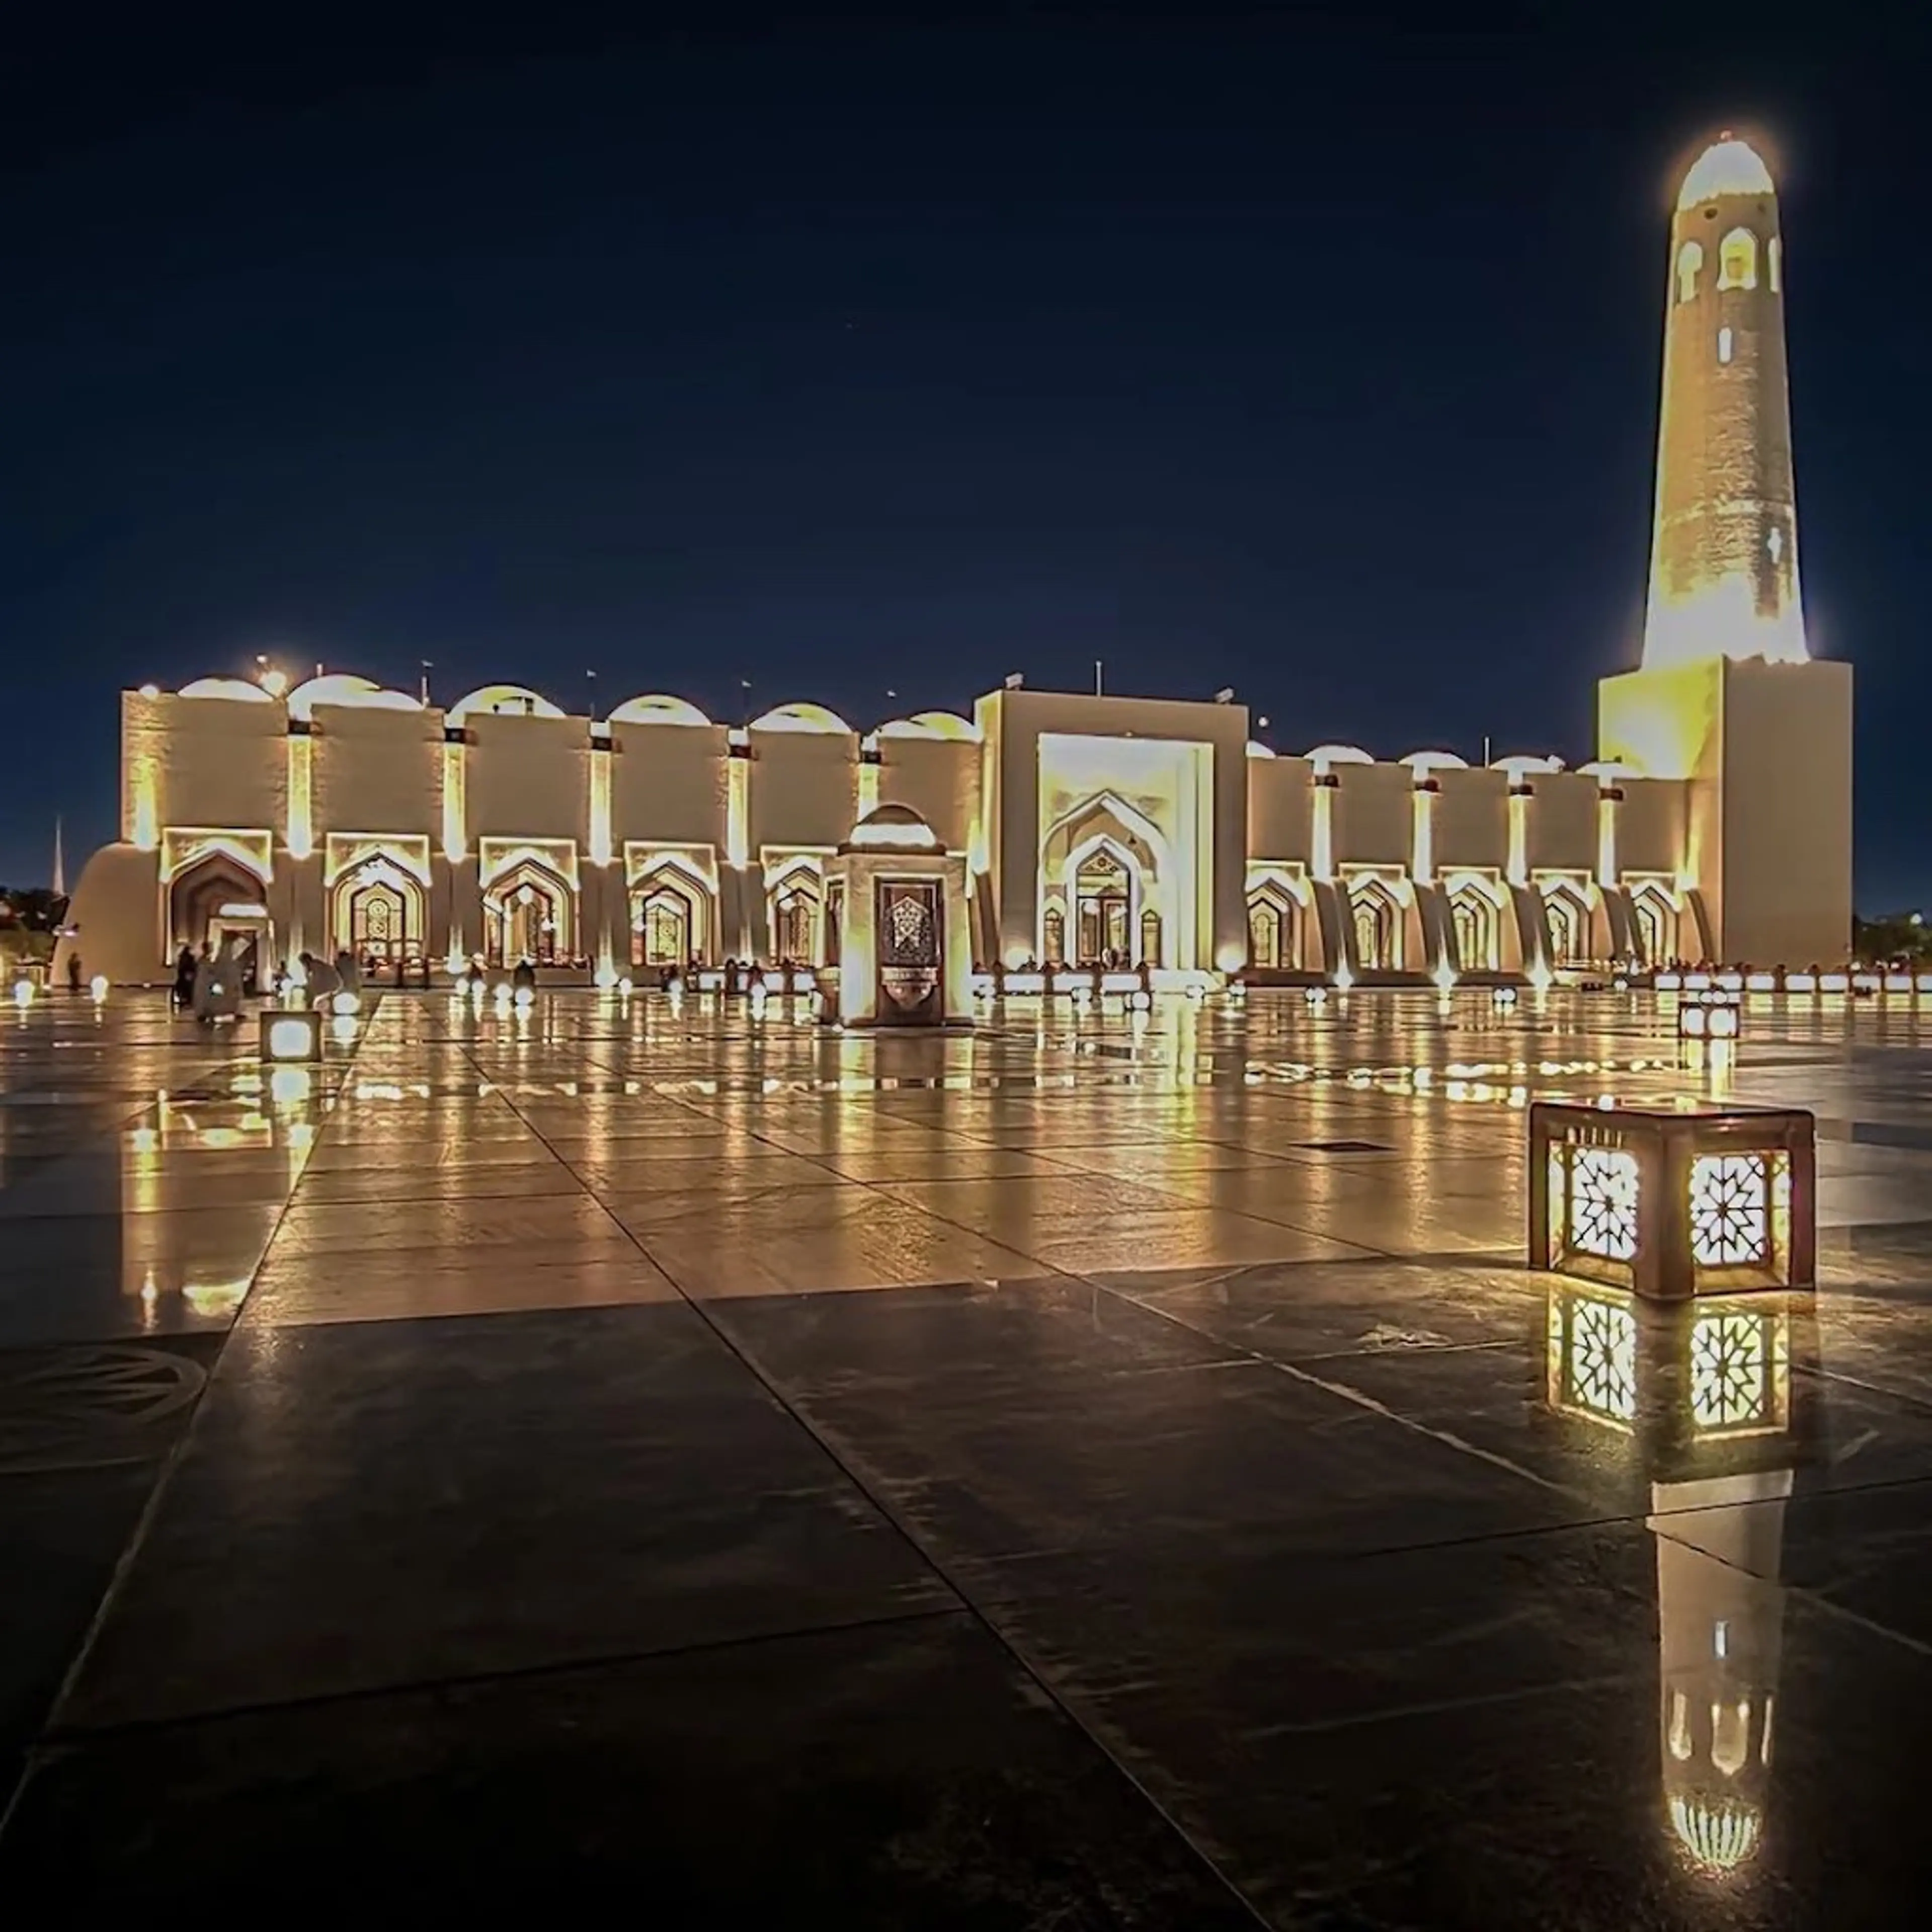 State Grand Mosque